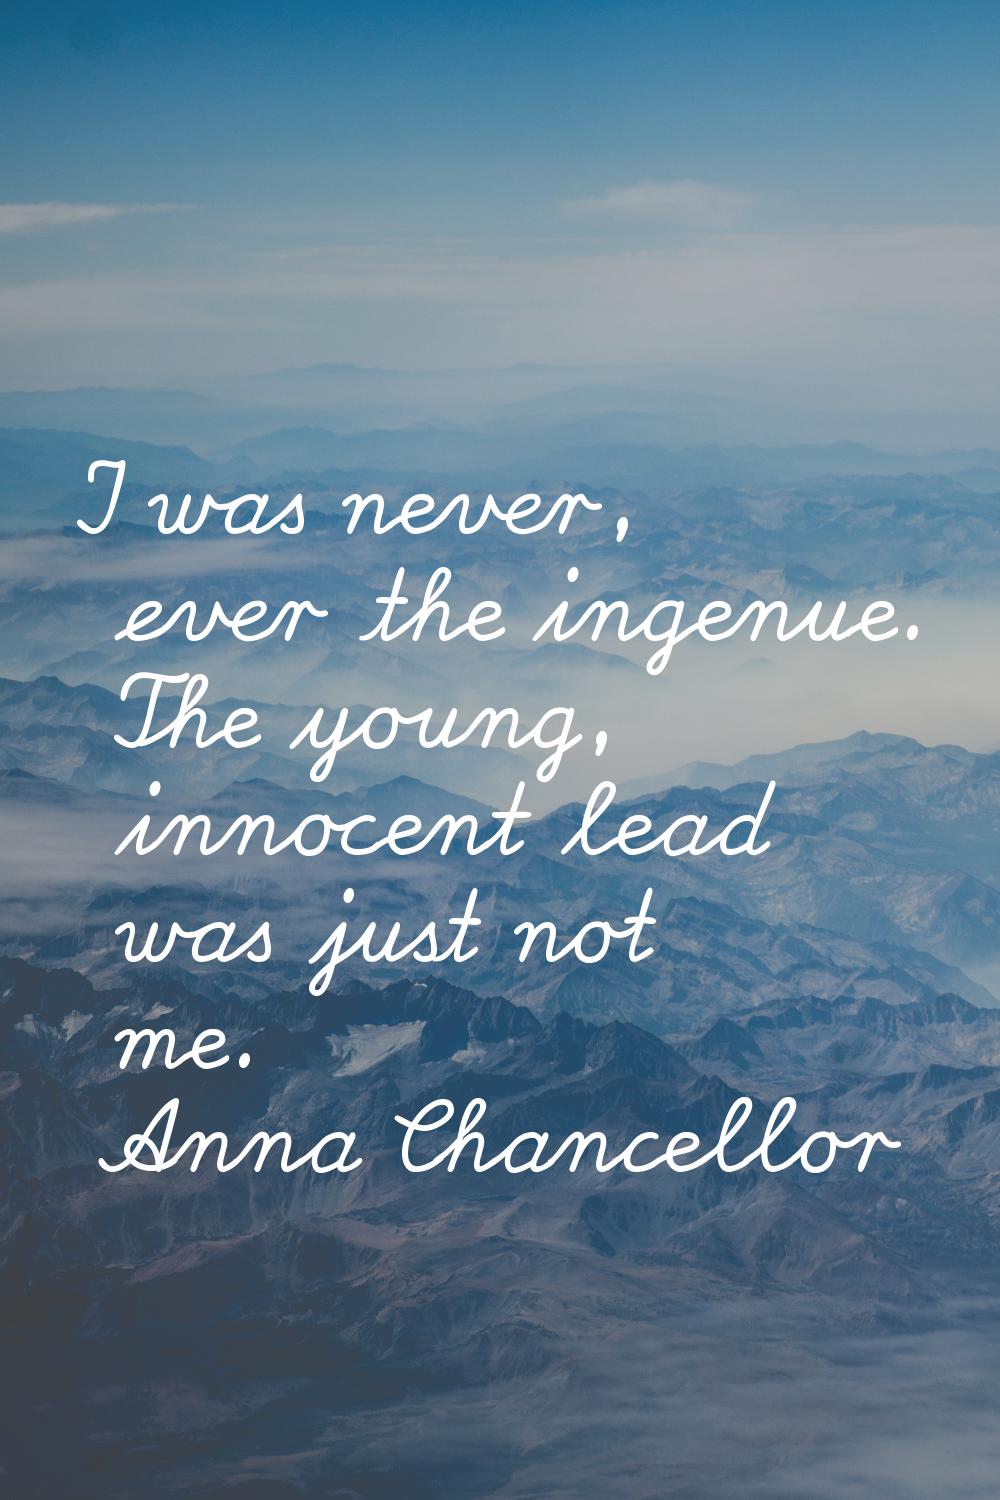 I was never, ever the ingenue. The young, innocent lead was just not me.